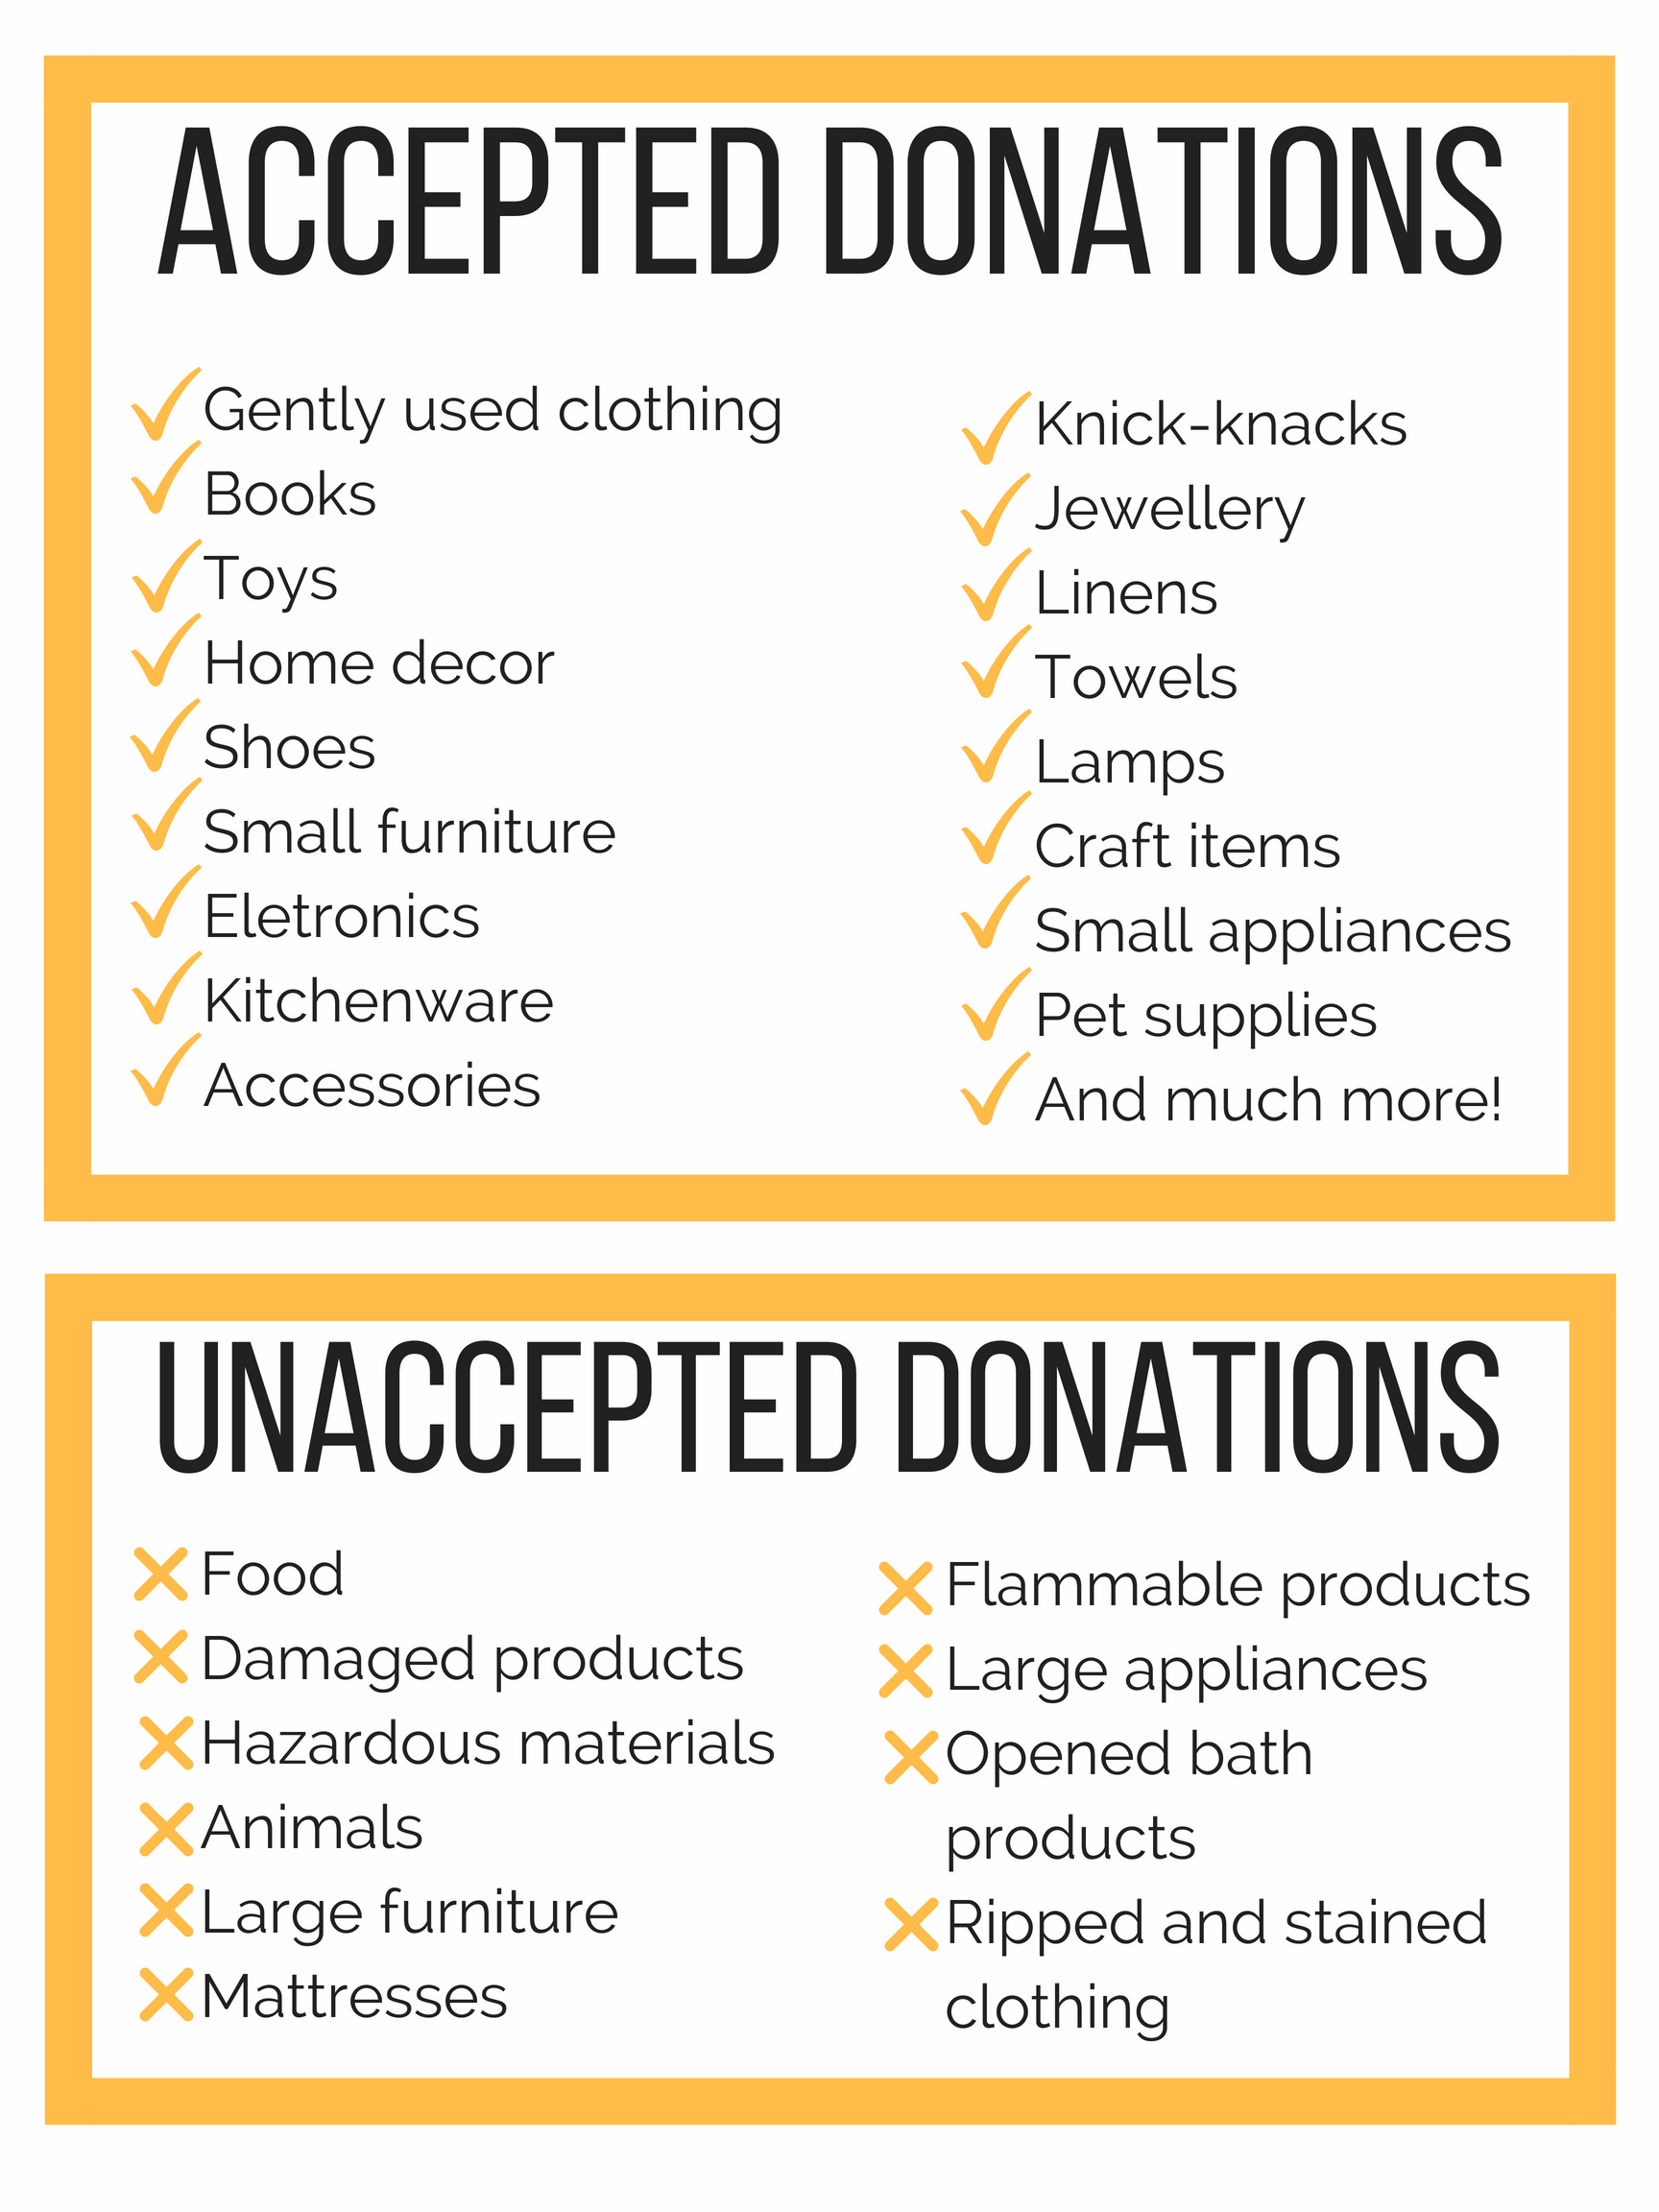 Accepted & unaccepted donations